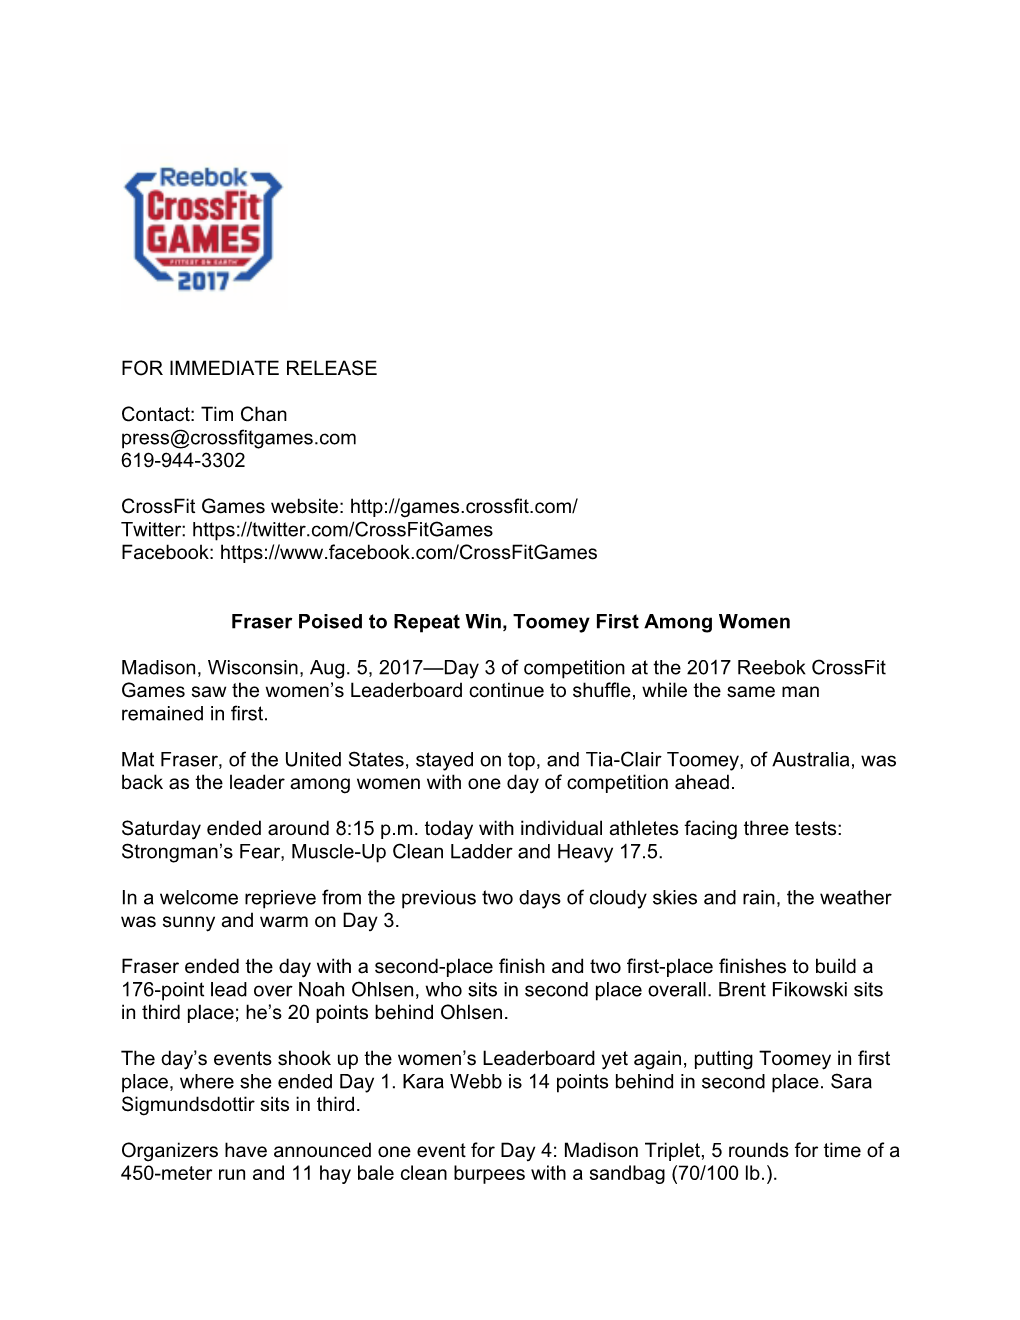 FOR IMMEDIATE RELEASE Contact: Tim Chan Press@Crossfitgames